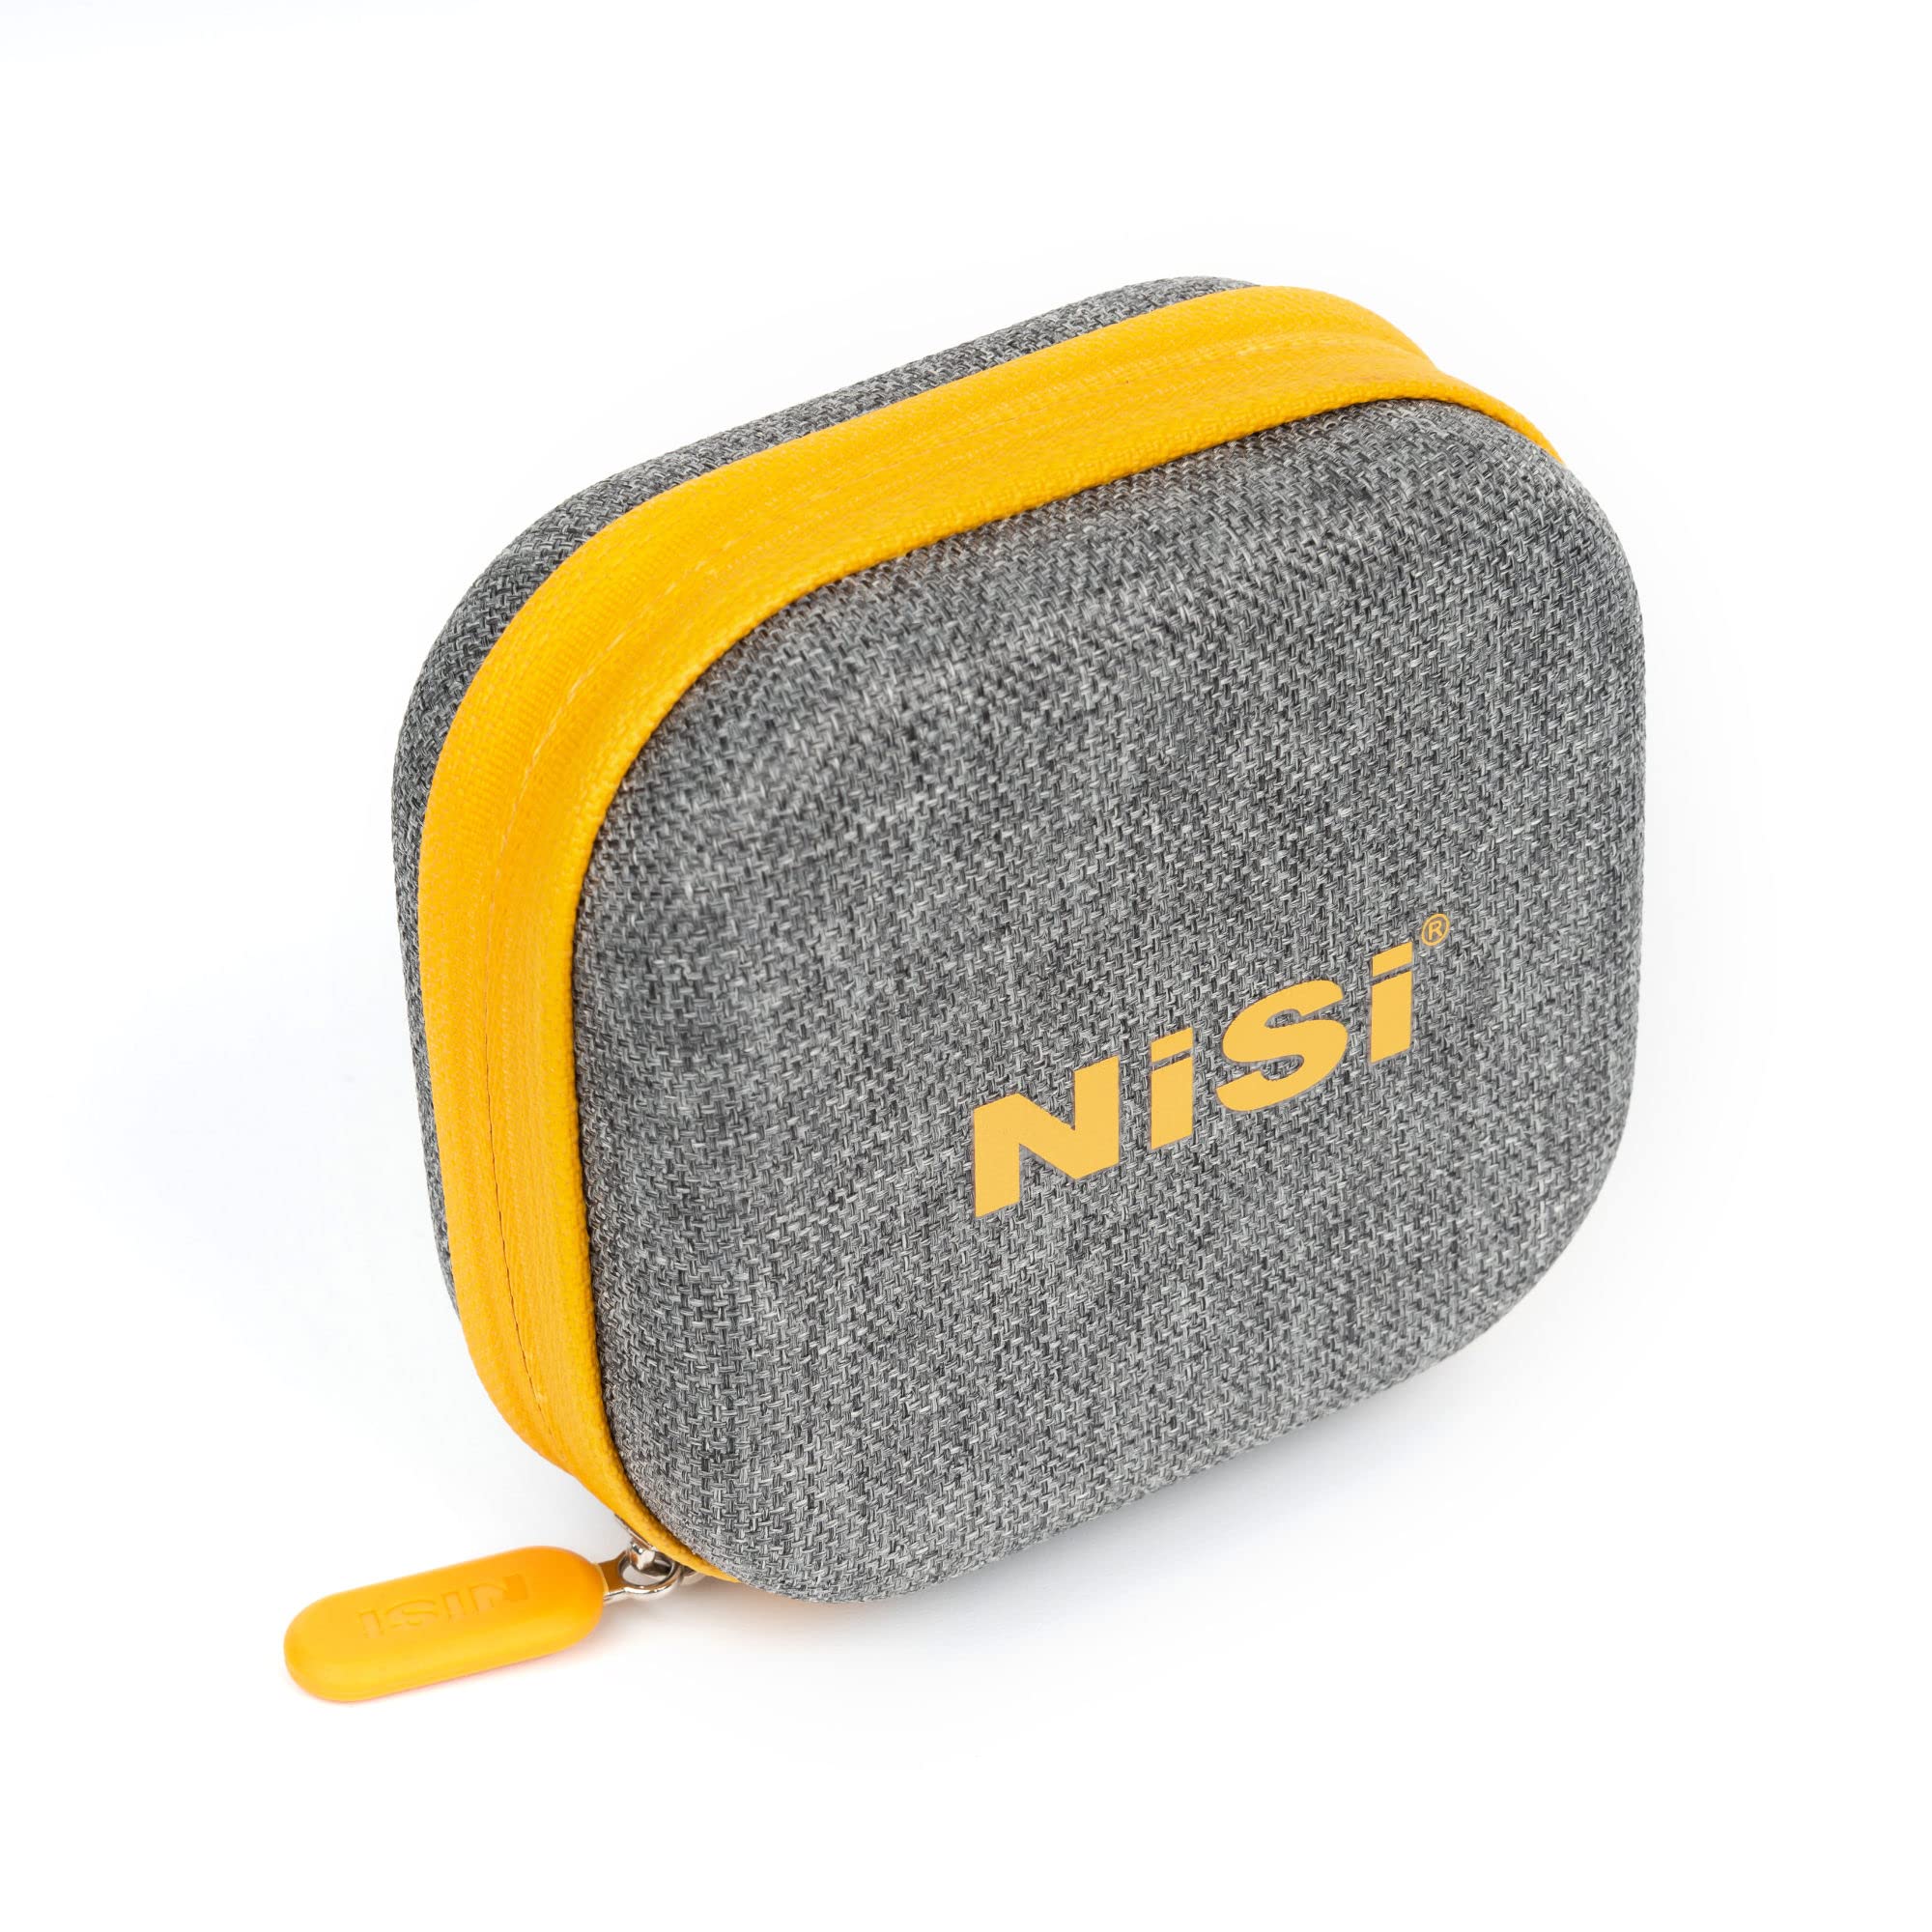 NiSi Small Circular Filter Caddy | 6-Pocket Filters Holder Case for Circular UV, Neutral-Density, and Optical Lens Glass Filters Up to 62mm | Camera Filter Accessories and Storage